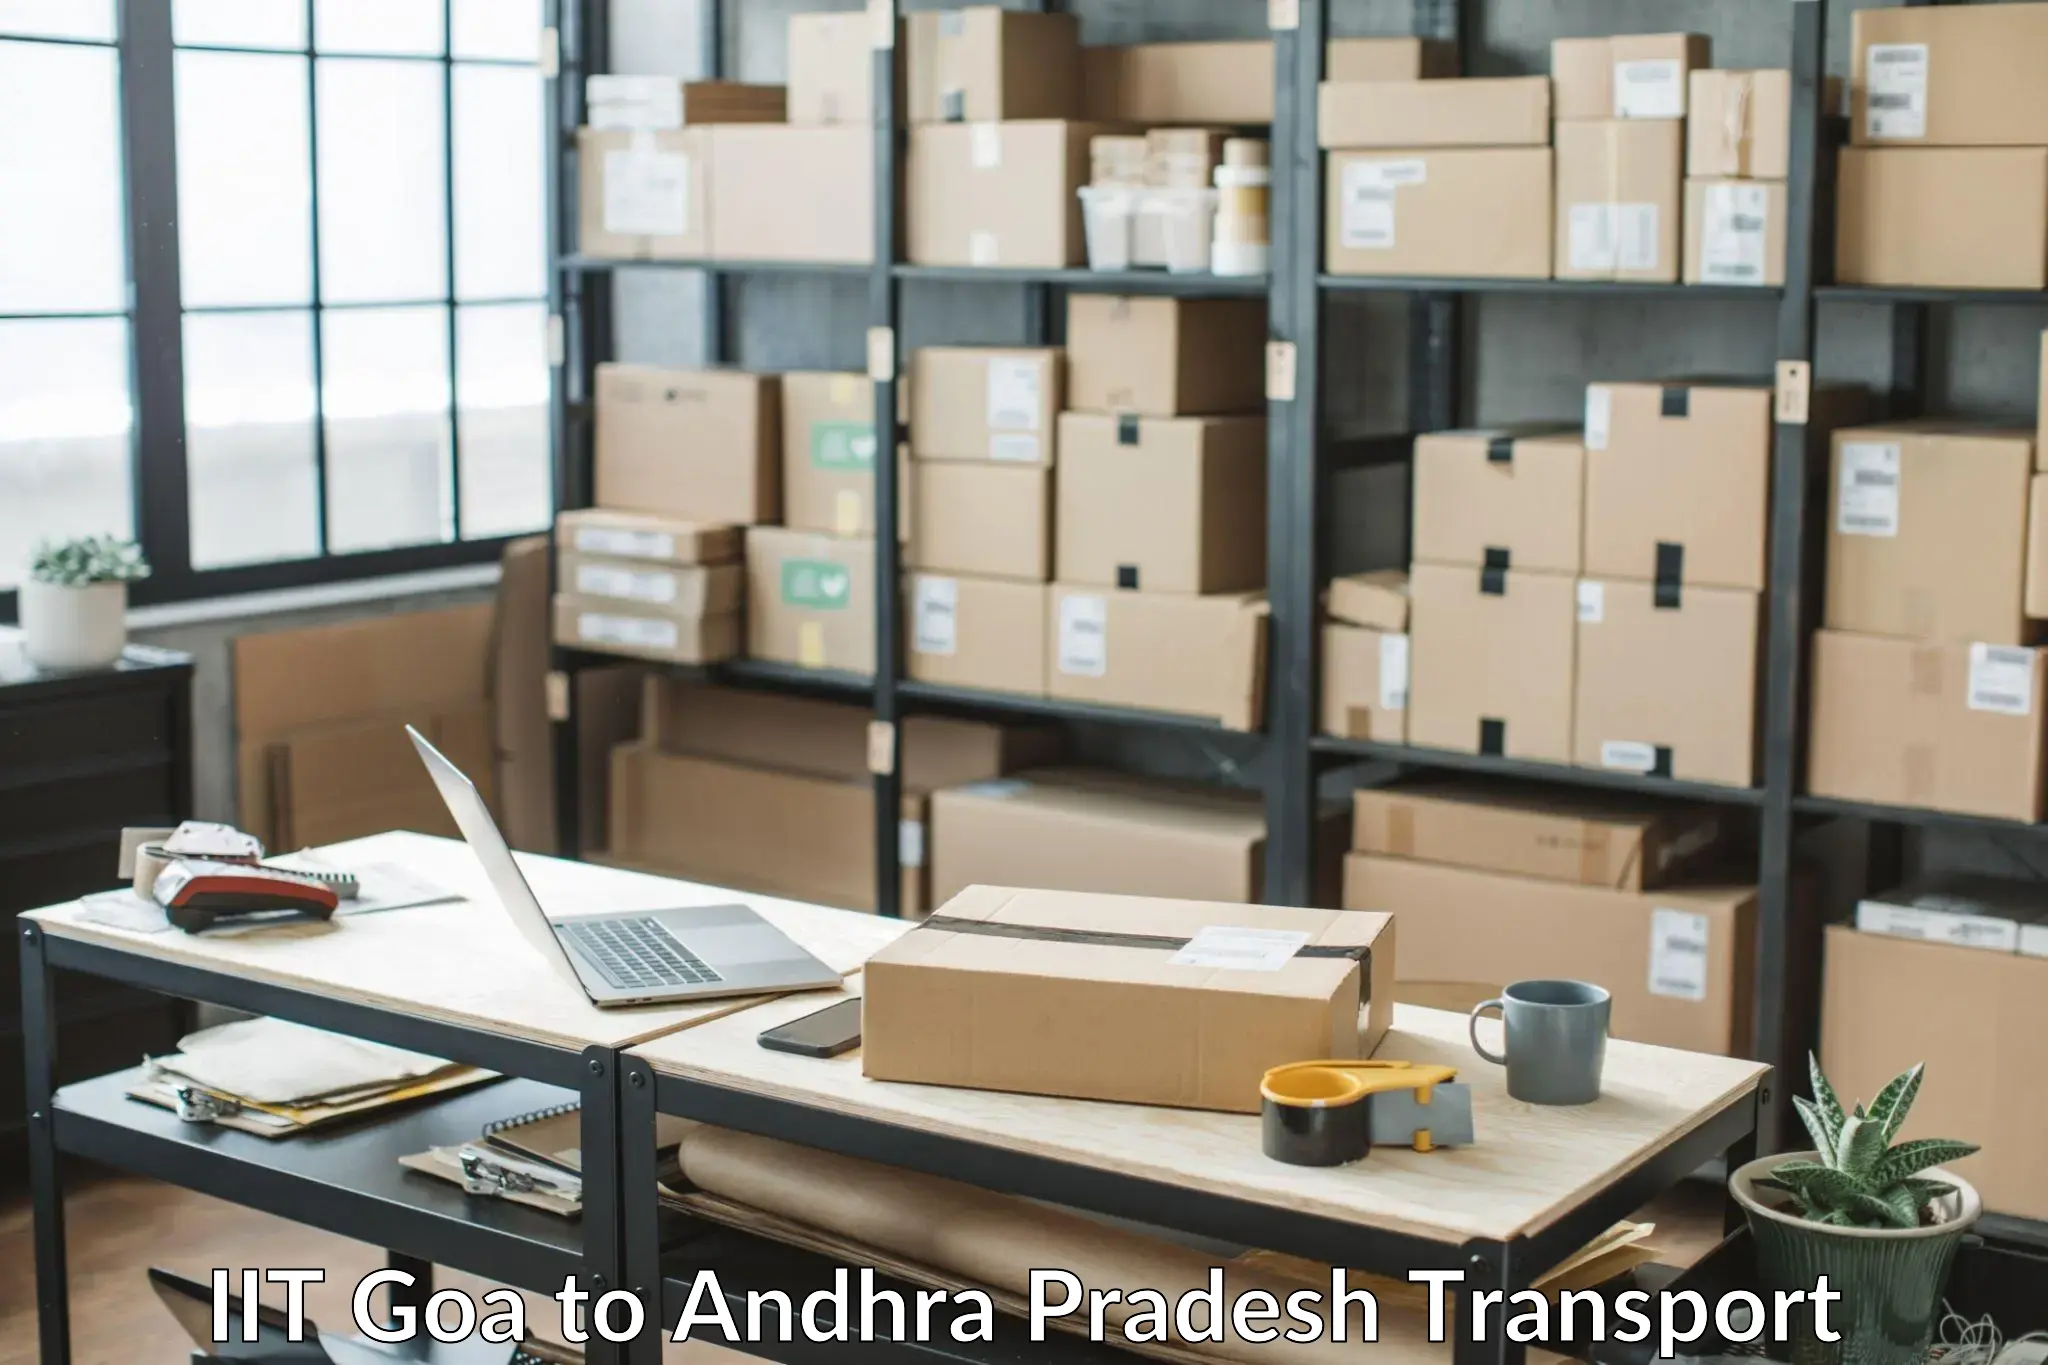 Package delivery services IIT Goa to Yerragondapalem